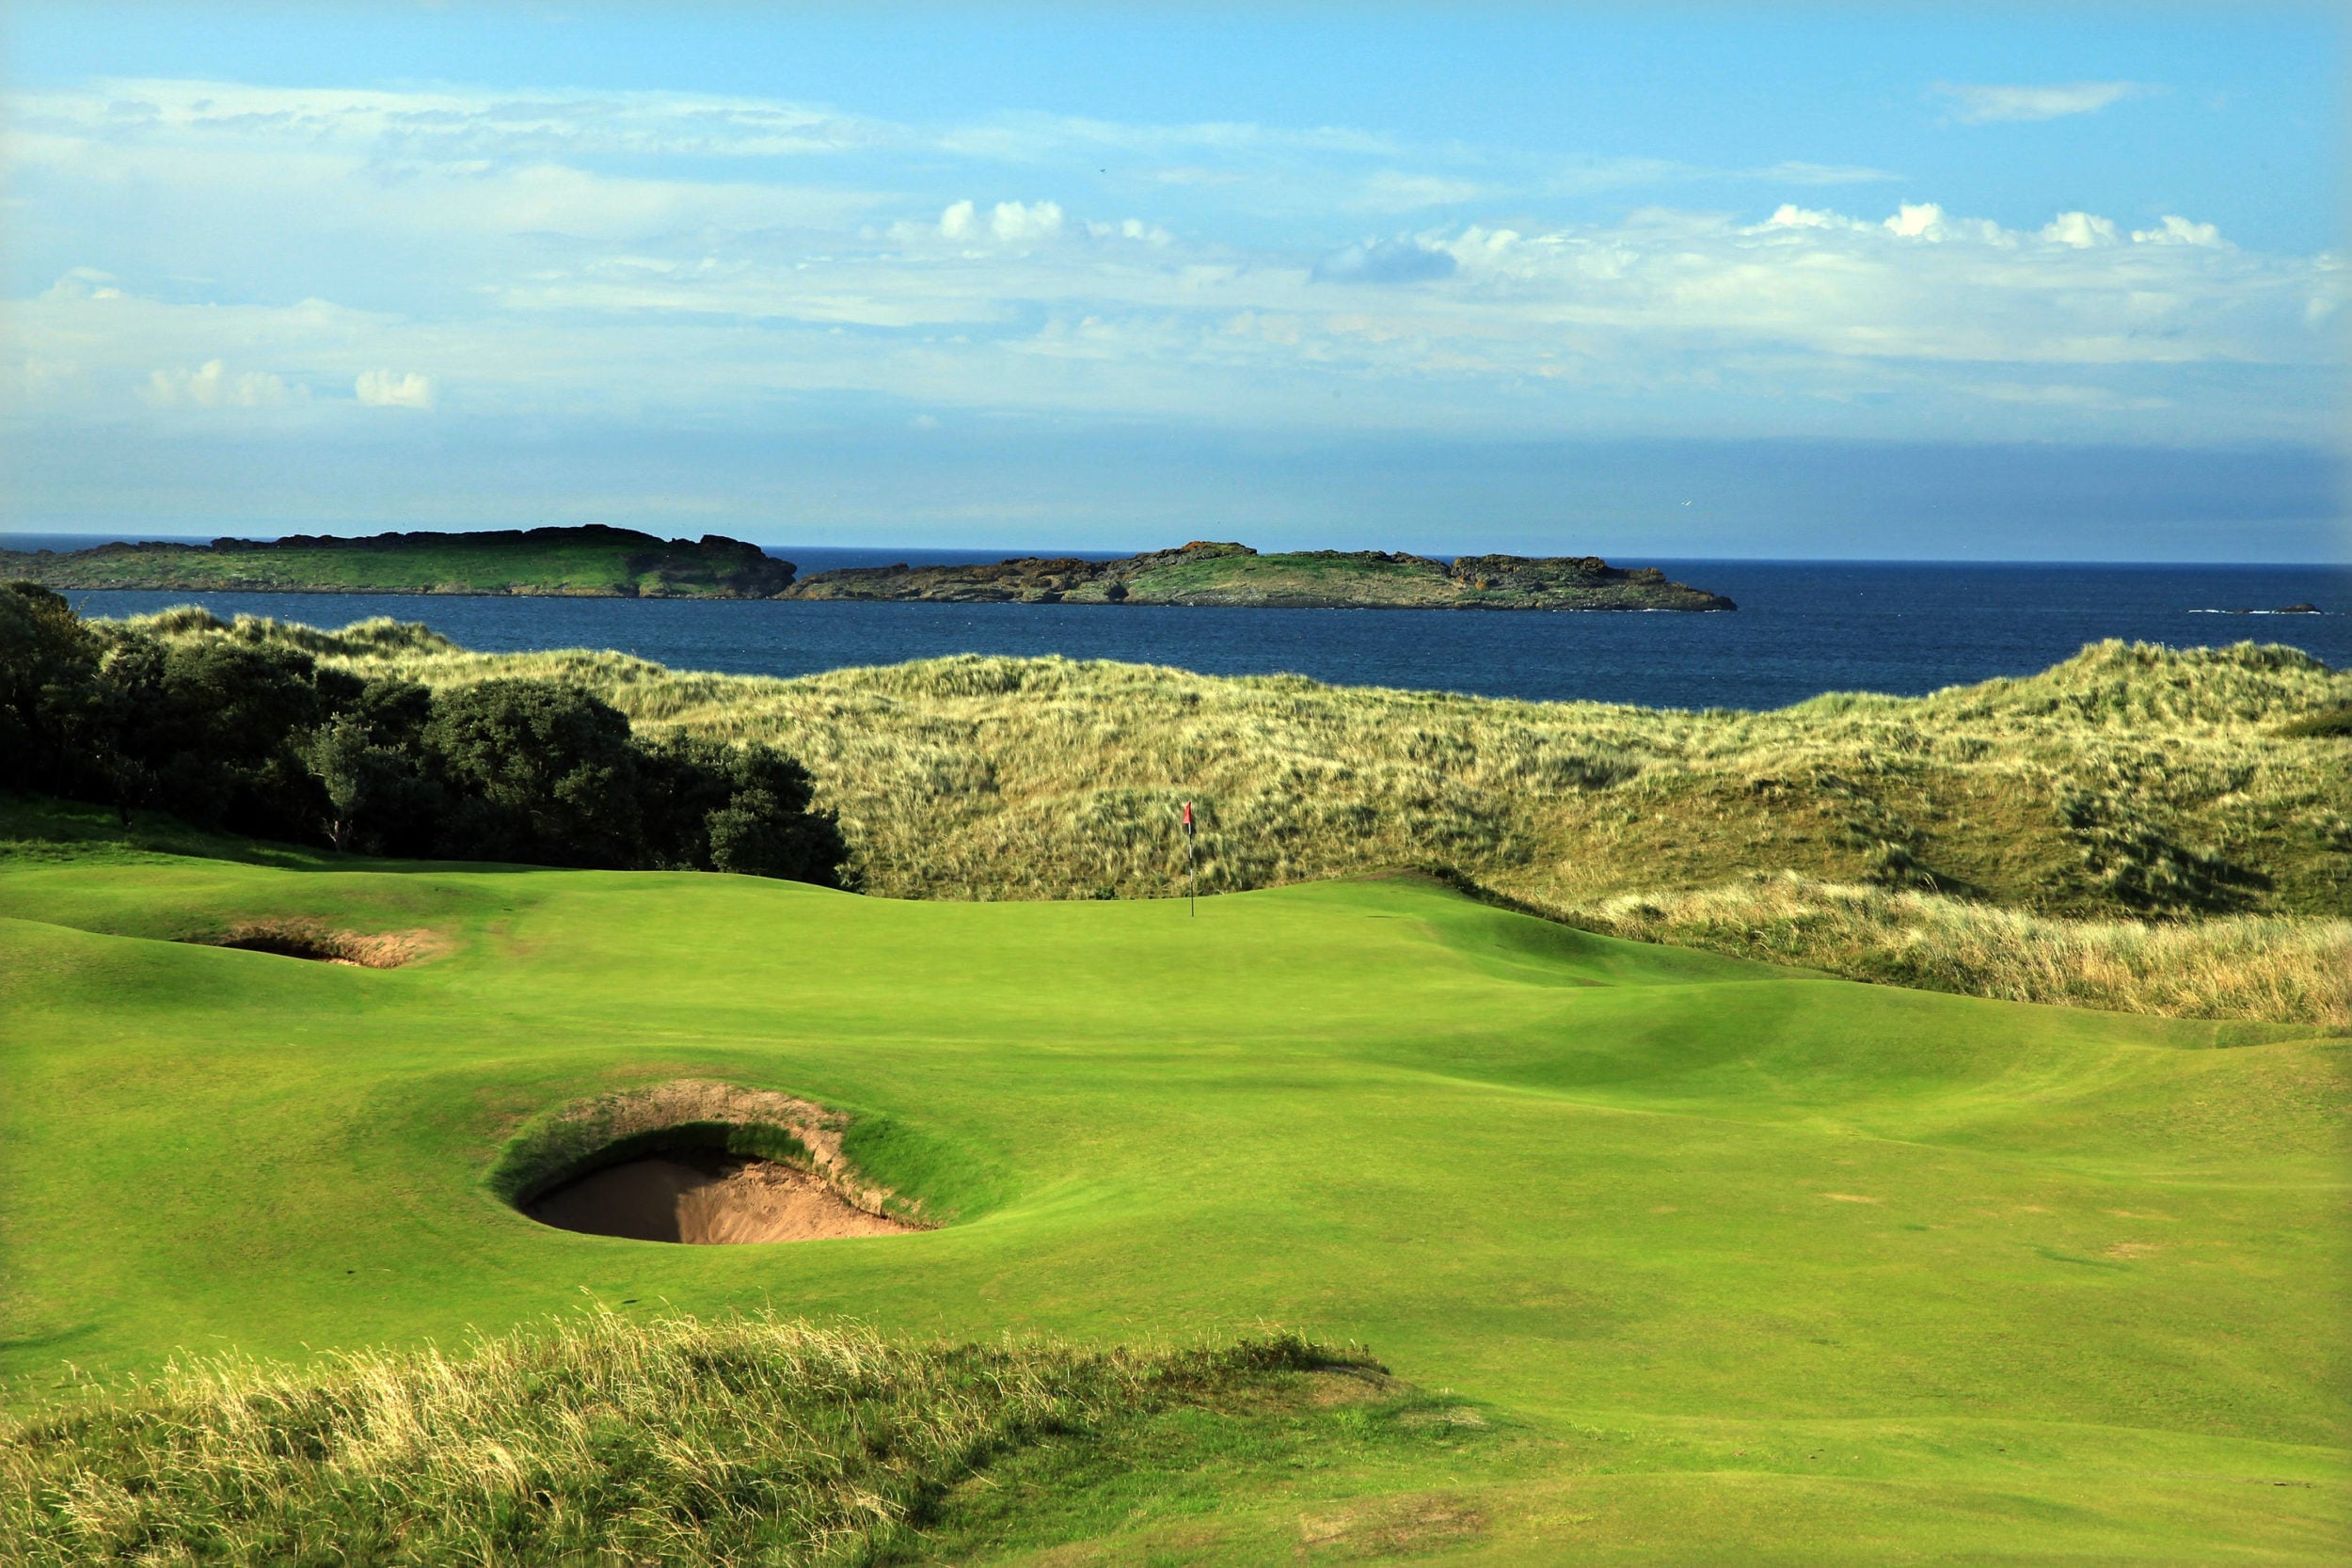 Image depicting a big pot bunker and raised green with the ocean in the background, Royal Portrush Dunluce Golf Course, Portrush, County Antrim, Northern Ireland